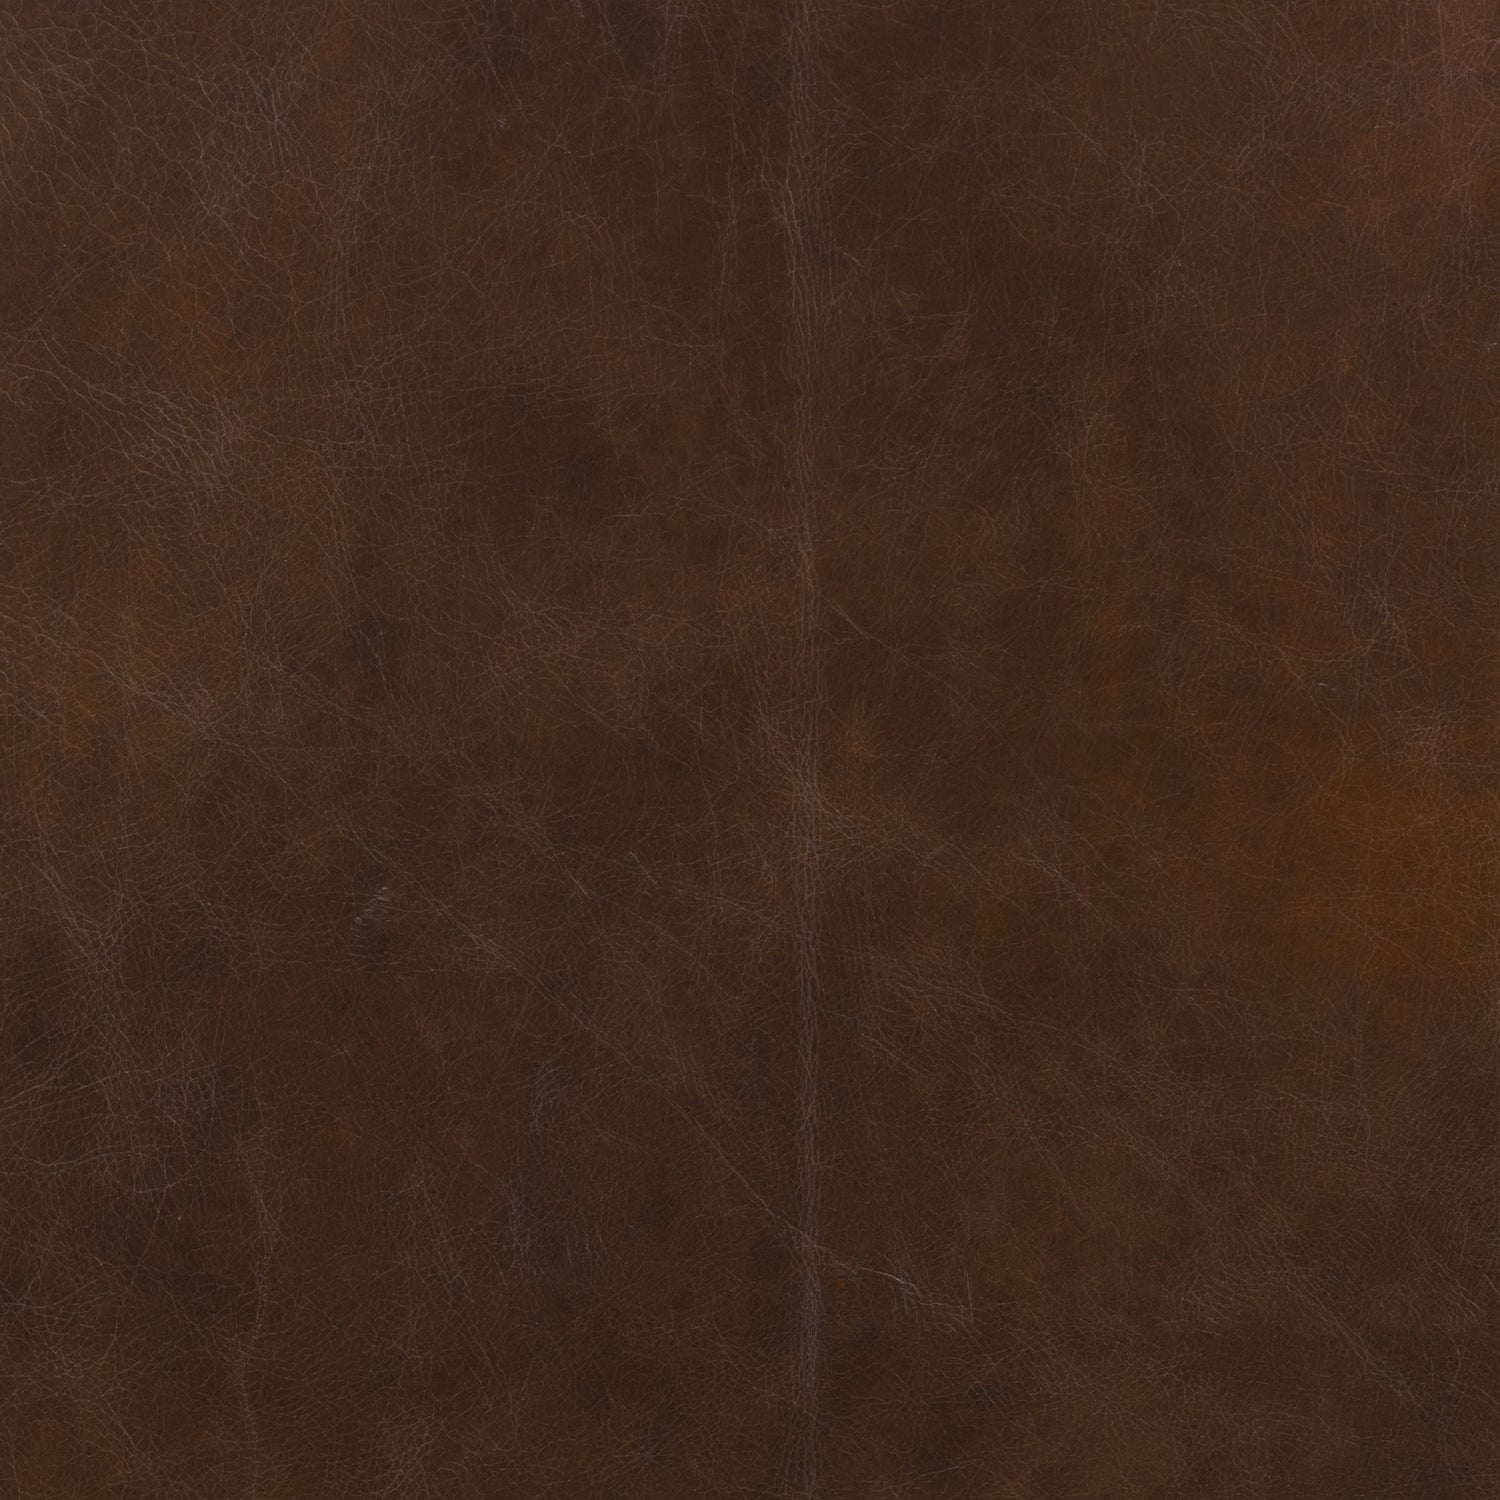 Italian Tanned Leather Swatches Vintage Brown